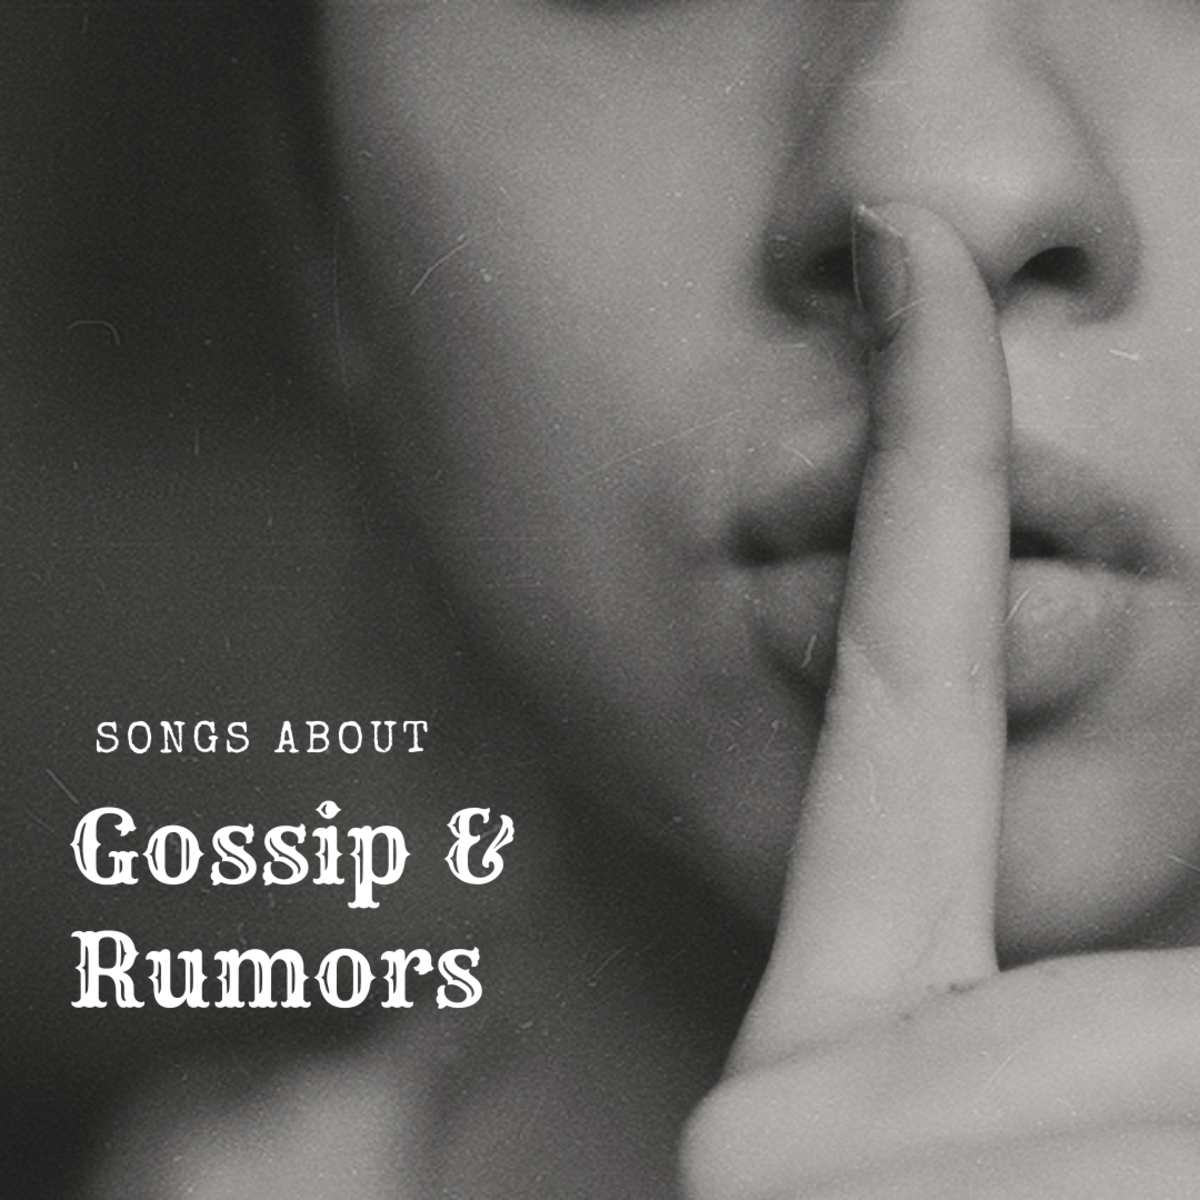 38 Songs About Gossip and Rumors